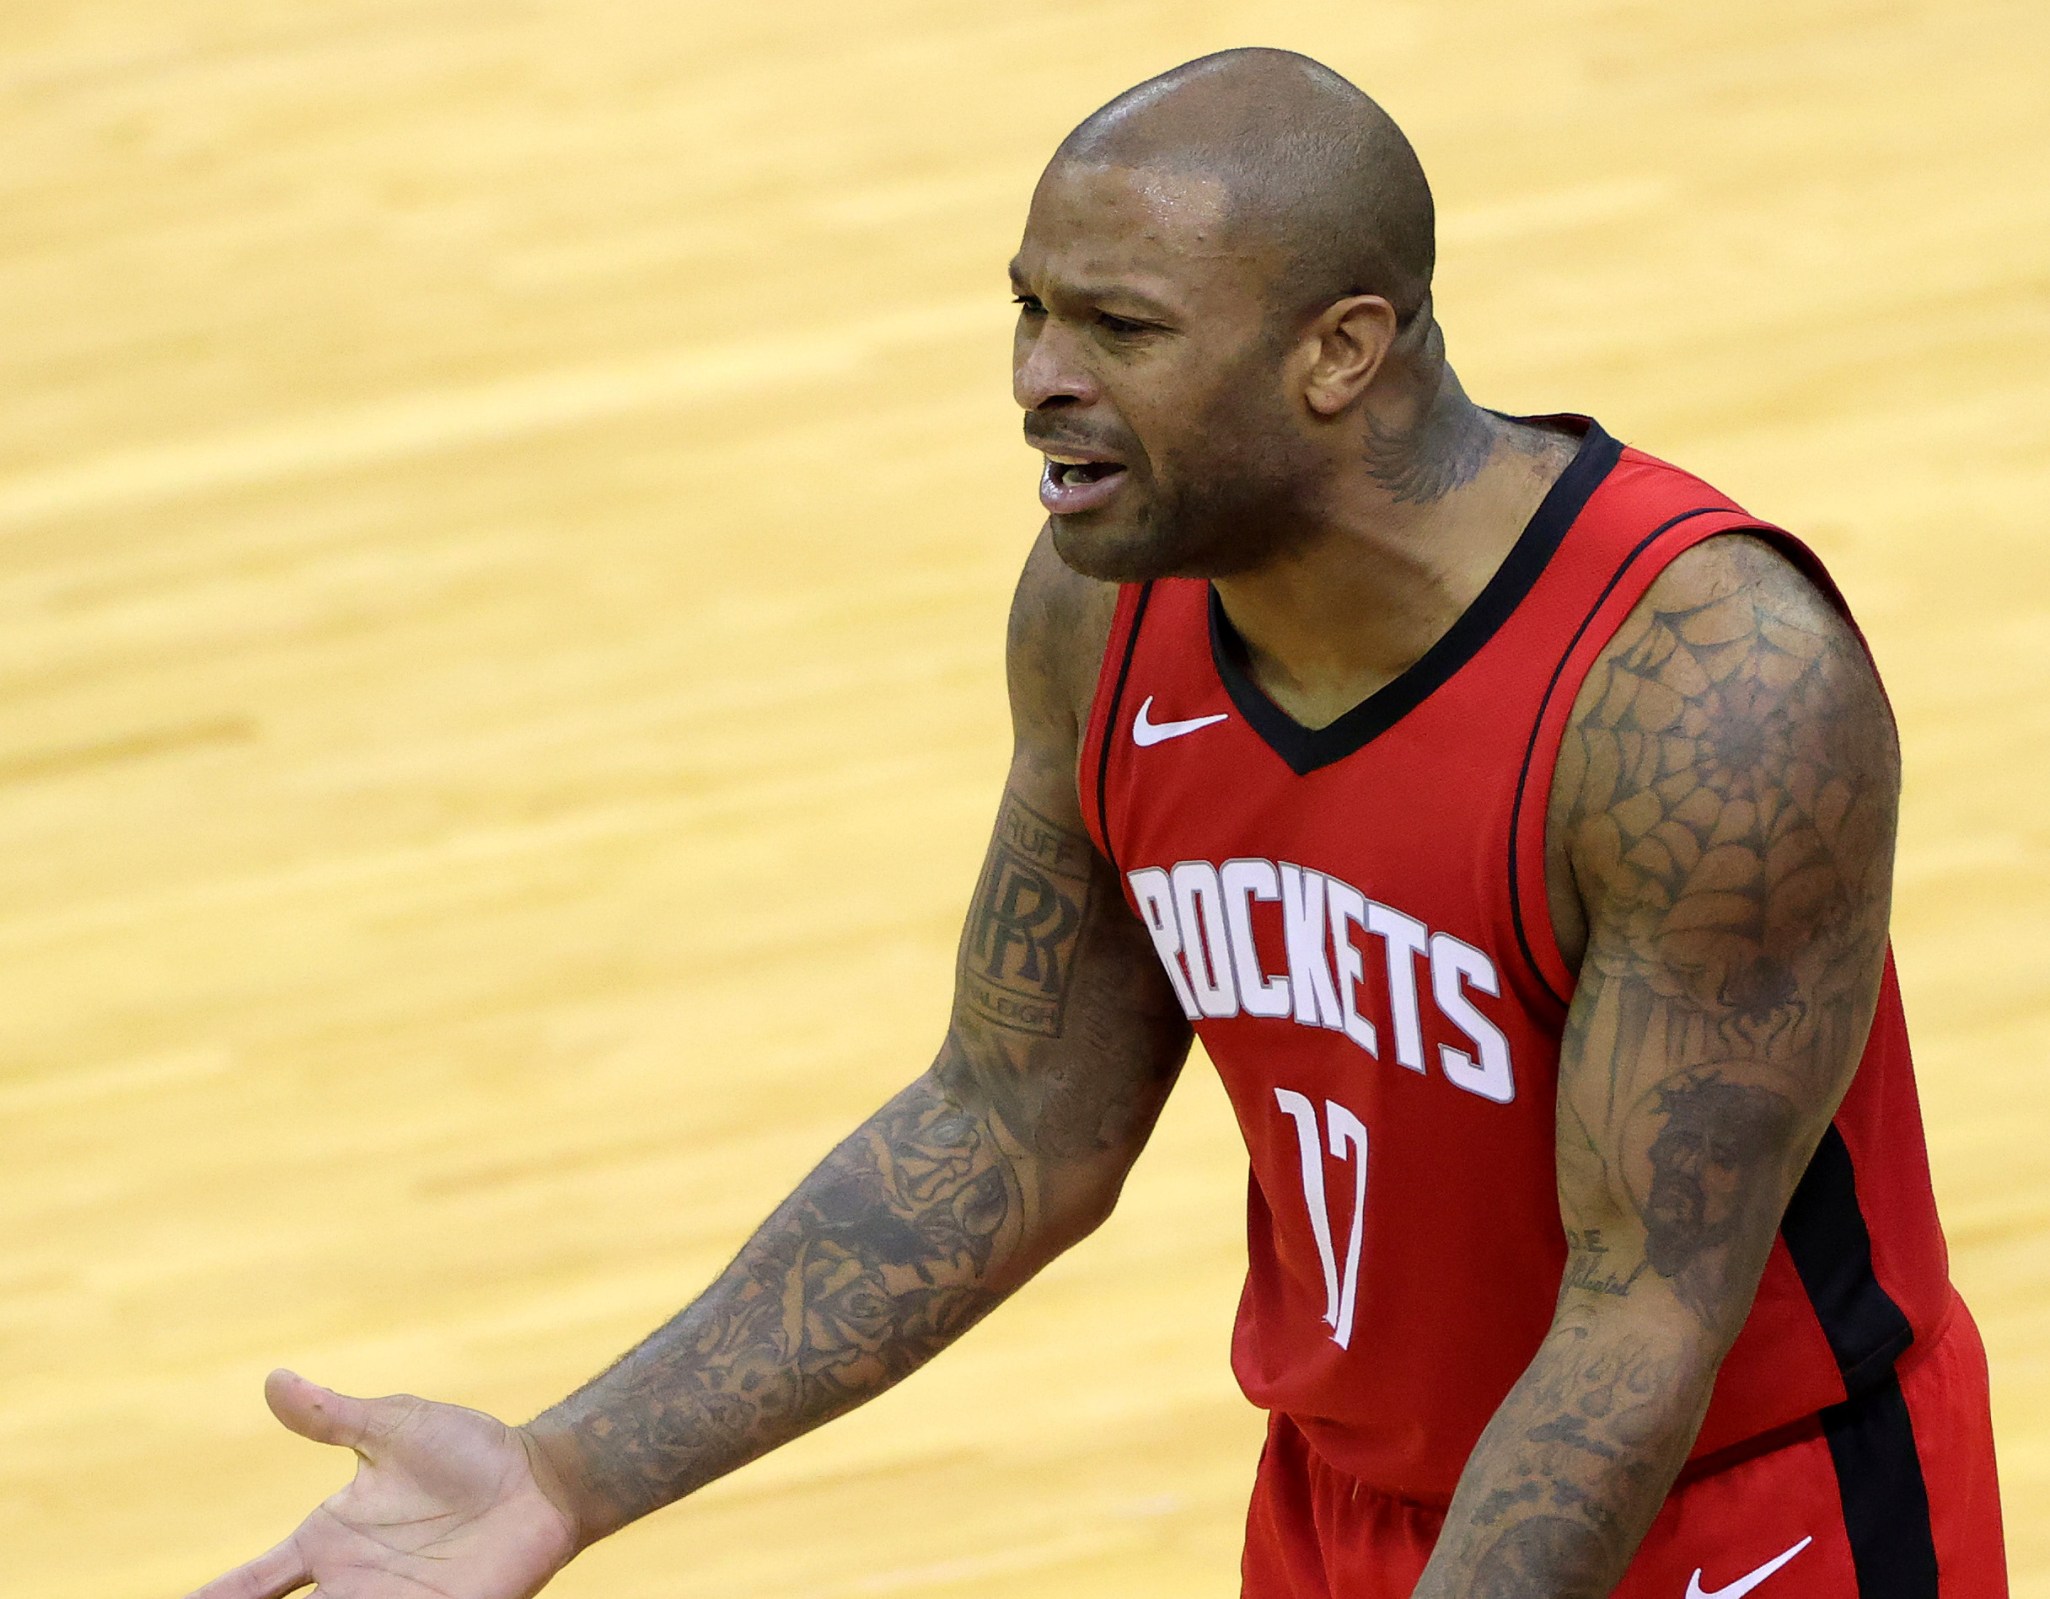 HOUSTON, TEXAS - JANUARY 10: P.J. Tucker #17 of the Houston Rockets in action against the Los Angeles Lakers during the second quarter of a game at Toyota Center on January 10, 2021 in Houston, Texas. NOTE TO USER: User expressly acknowledges and agrees that, by downloading and or using this photograph, User is consenting to the terms and conditions of the Getty Images License Agreement. (Photo by Carmen Mandato/Getty Images)